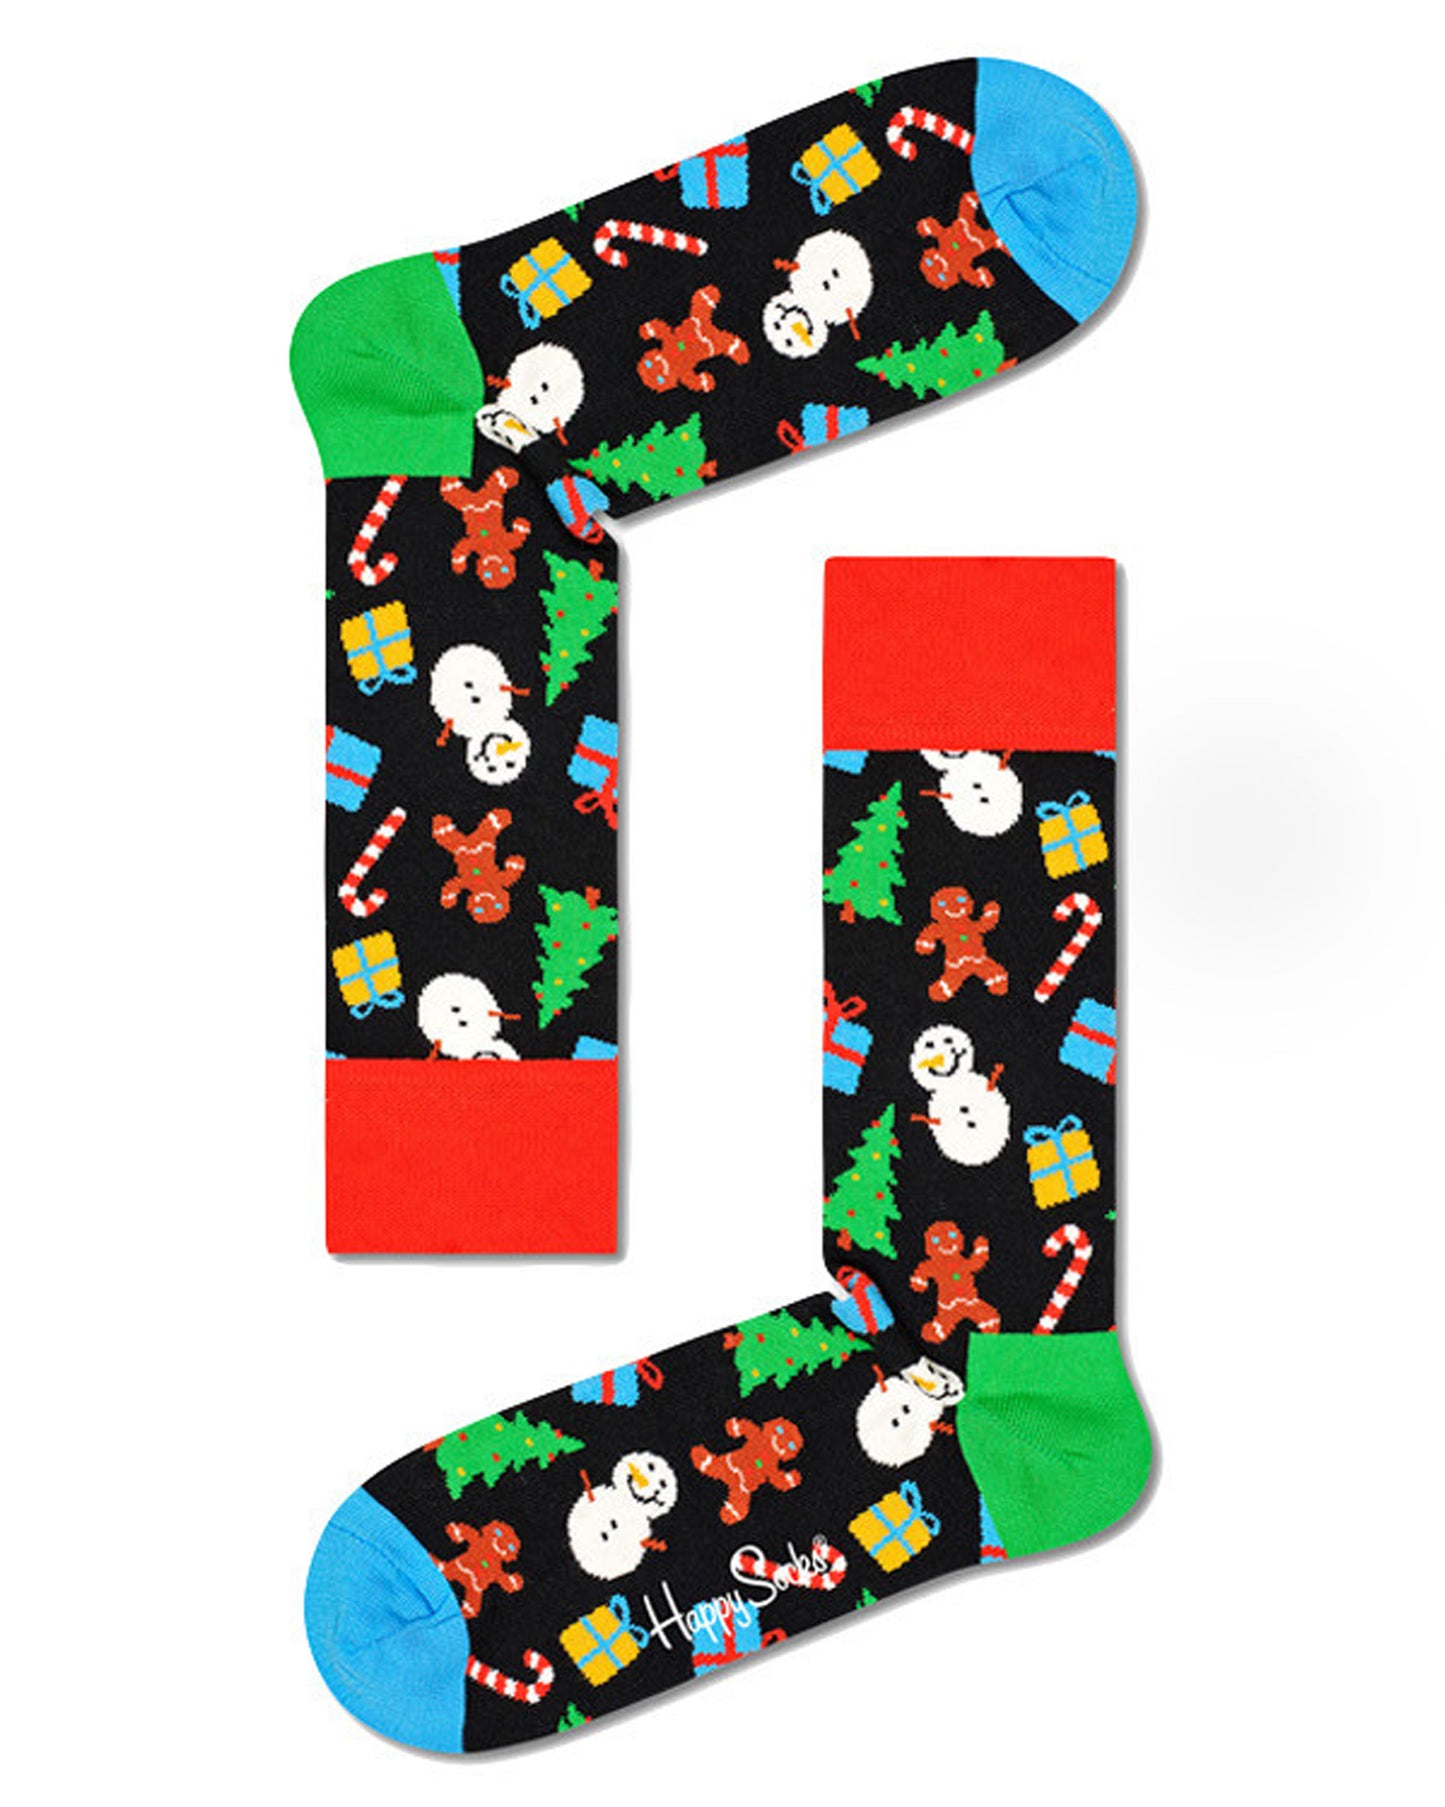 Happy Socks XDBS02-6500 Big Dot Snowman Gift Box - Xmas sock a pattern of ginger bread men, candy canes, snowmen, presents, Xmas trees on a black background with light blue toe, green heel and red cuff.